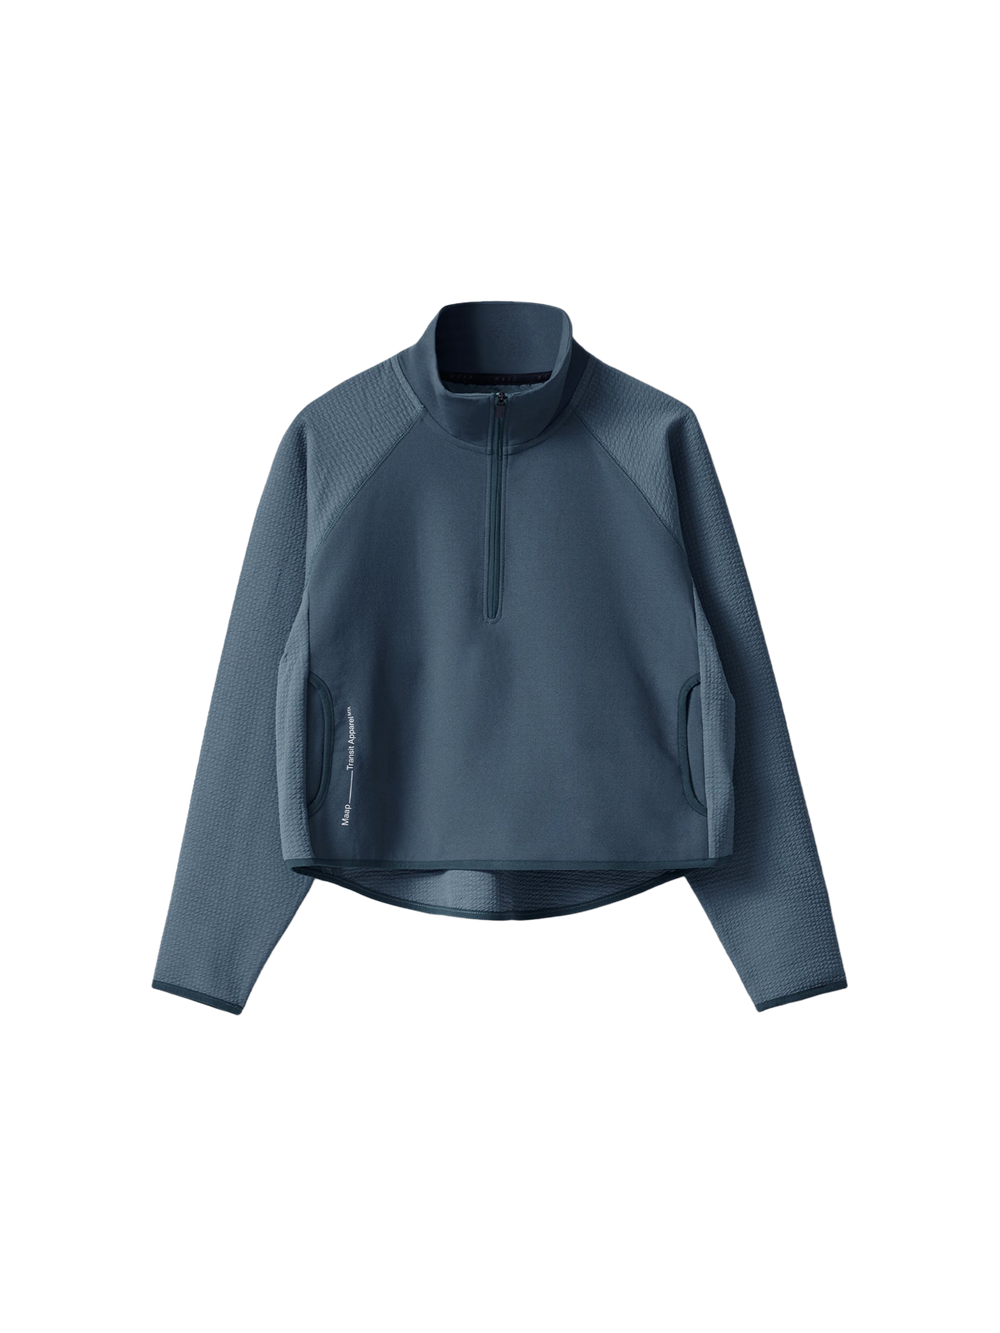 Product Image for Women's Power Air 1/4 Zip